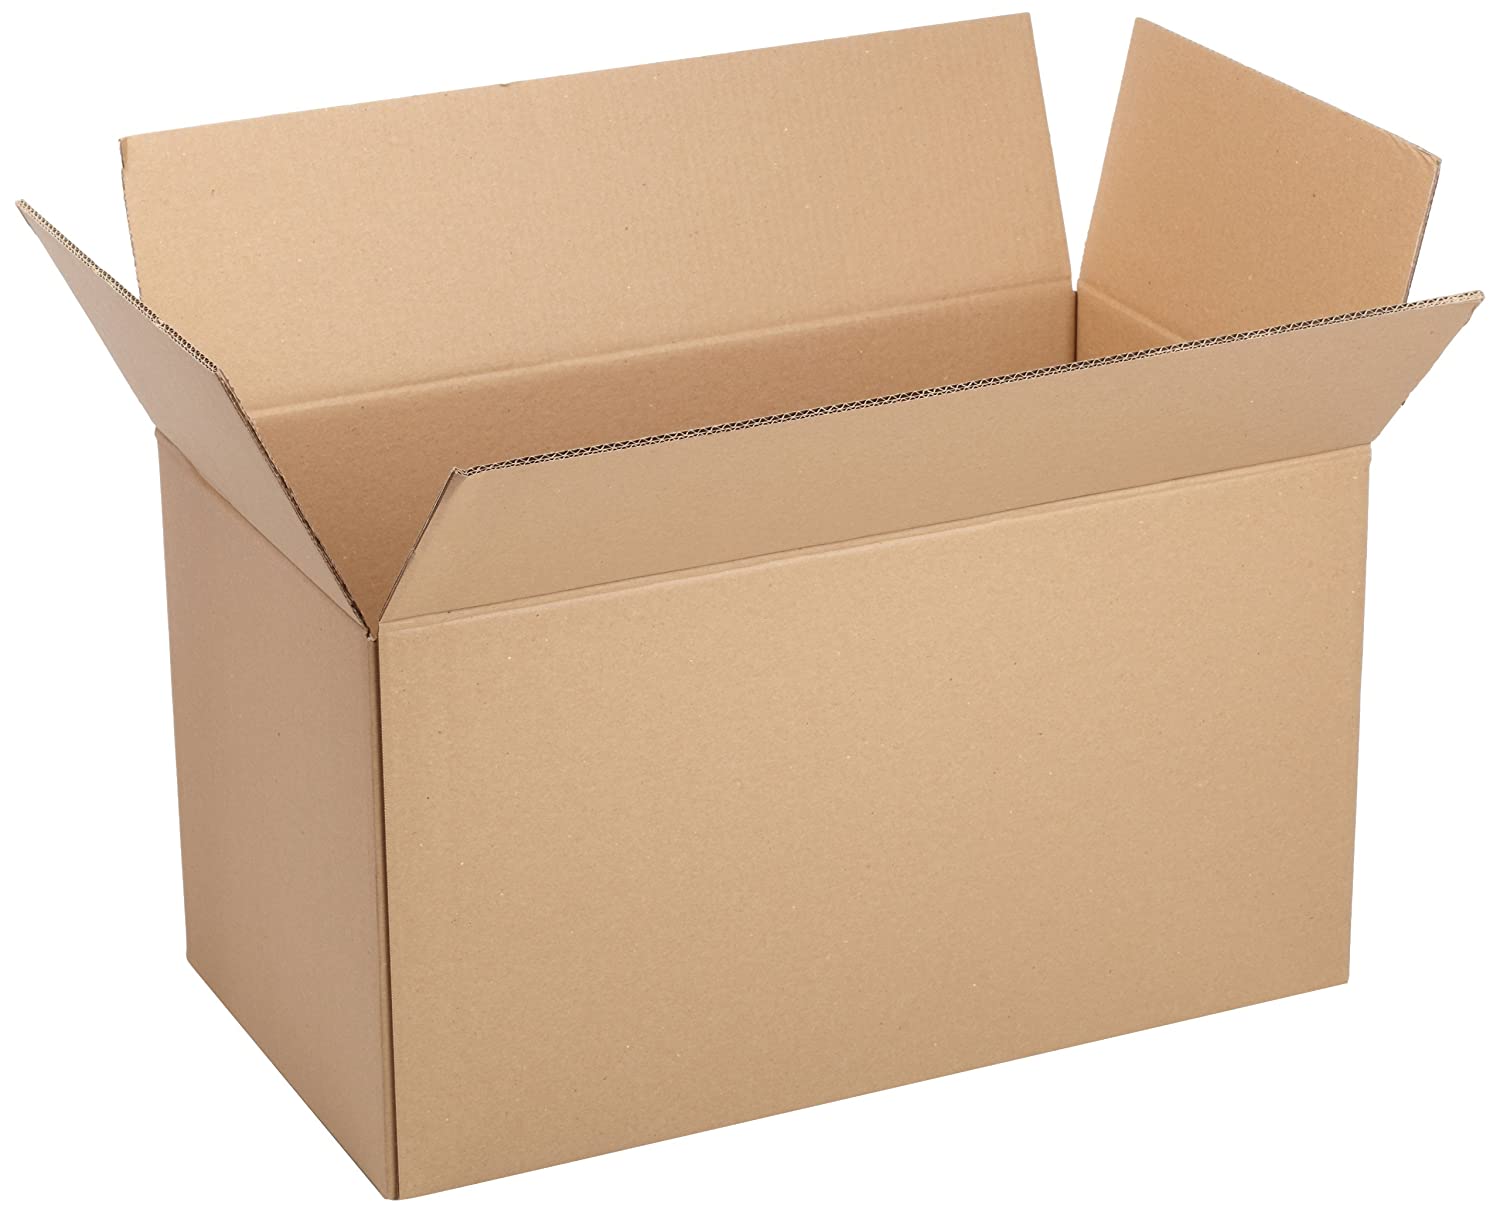 Wholesale Corrugated Boxes for Prodcut Storage and Shipping